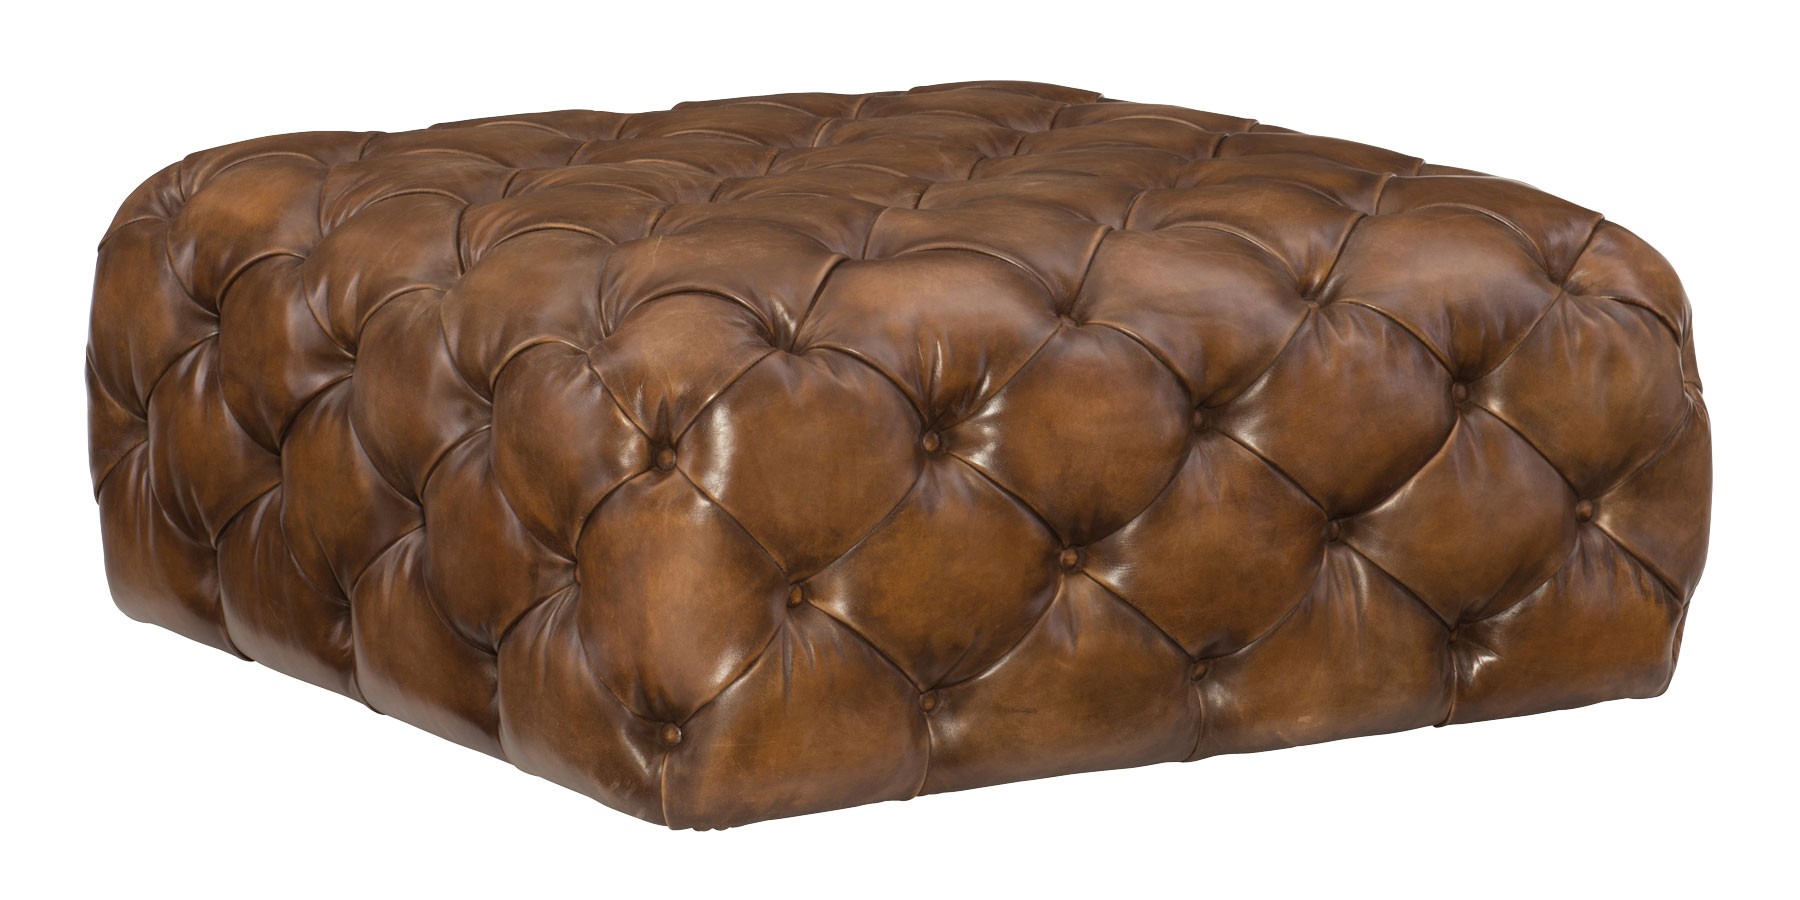 Large square tufted leather coffee table ottoman